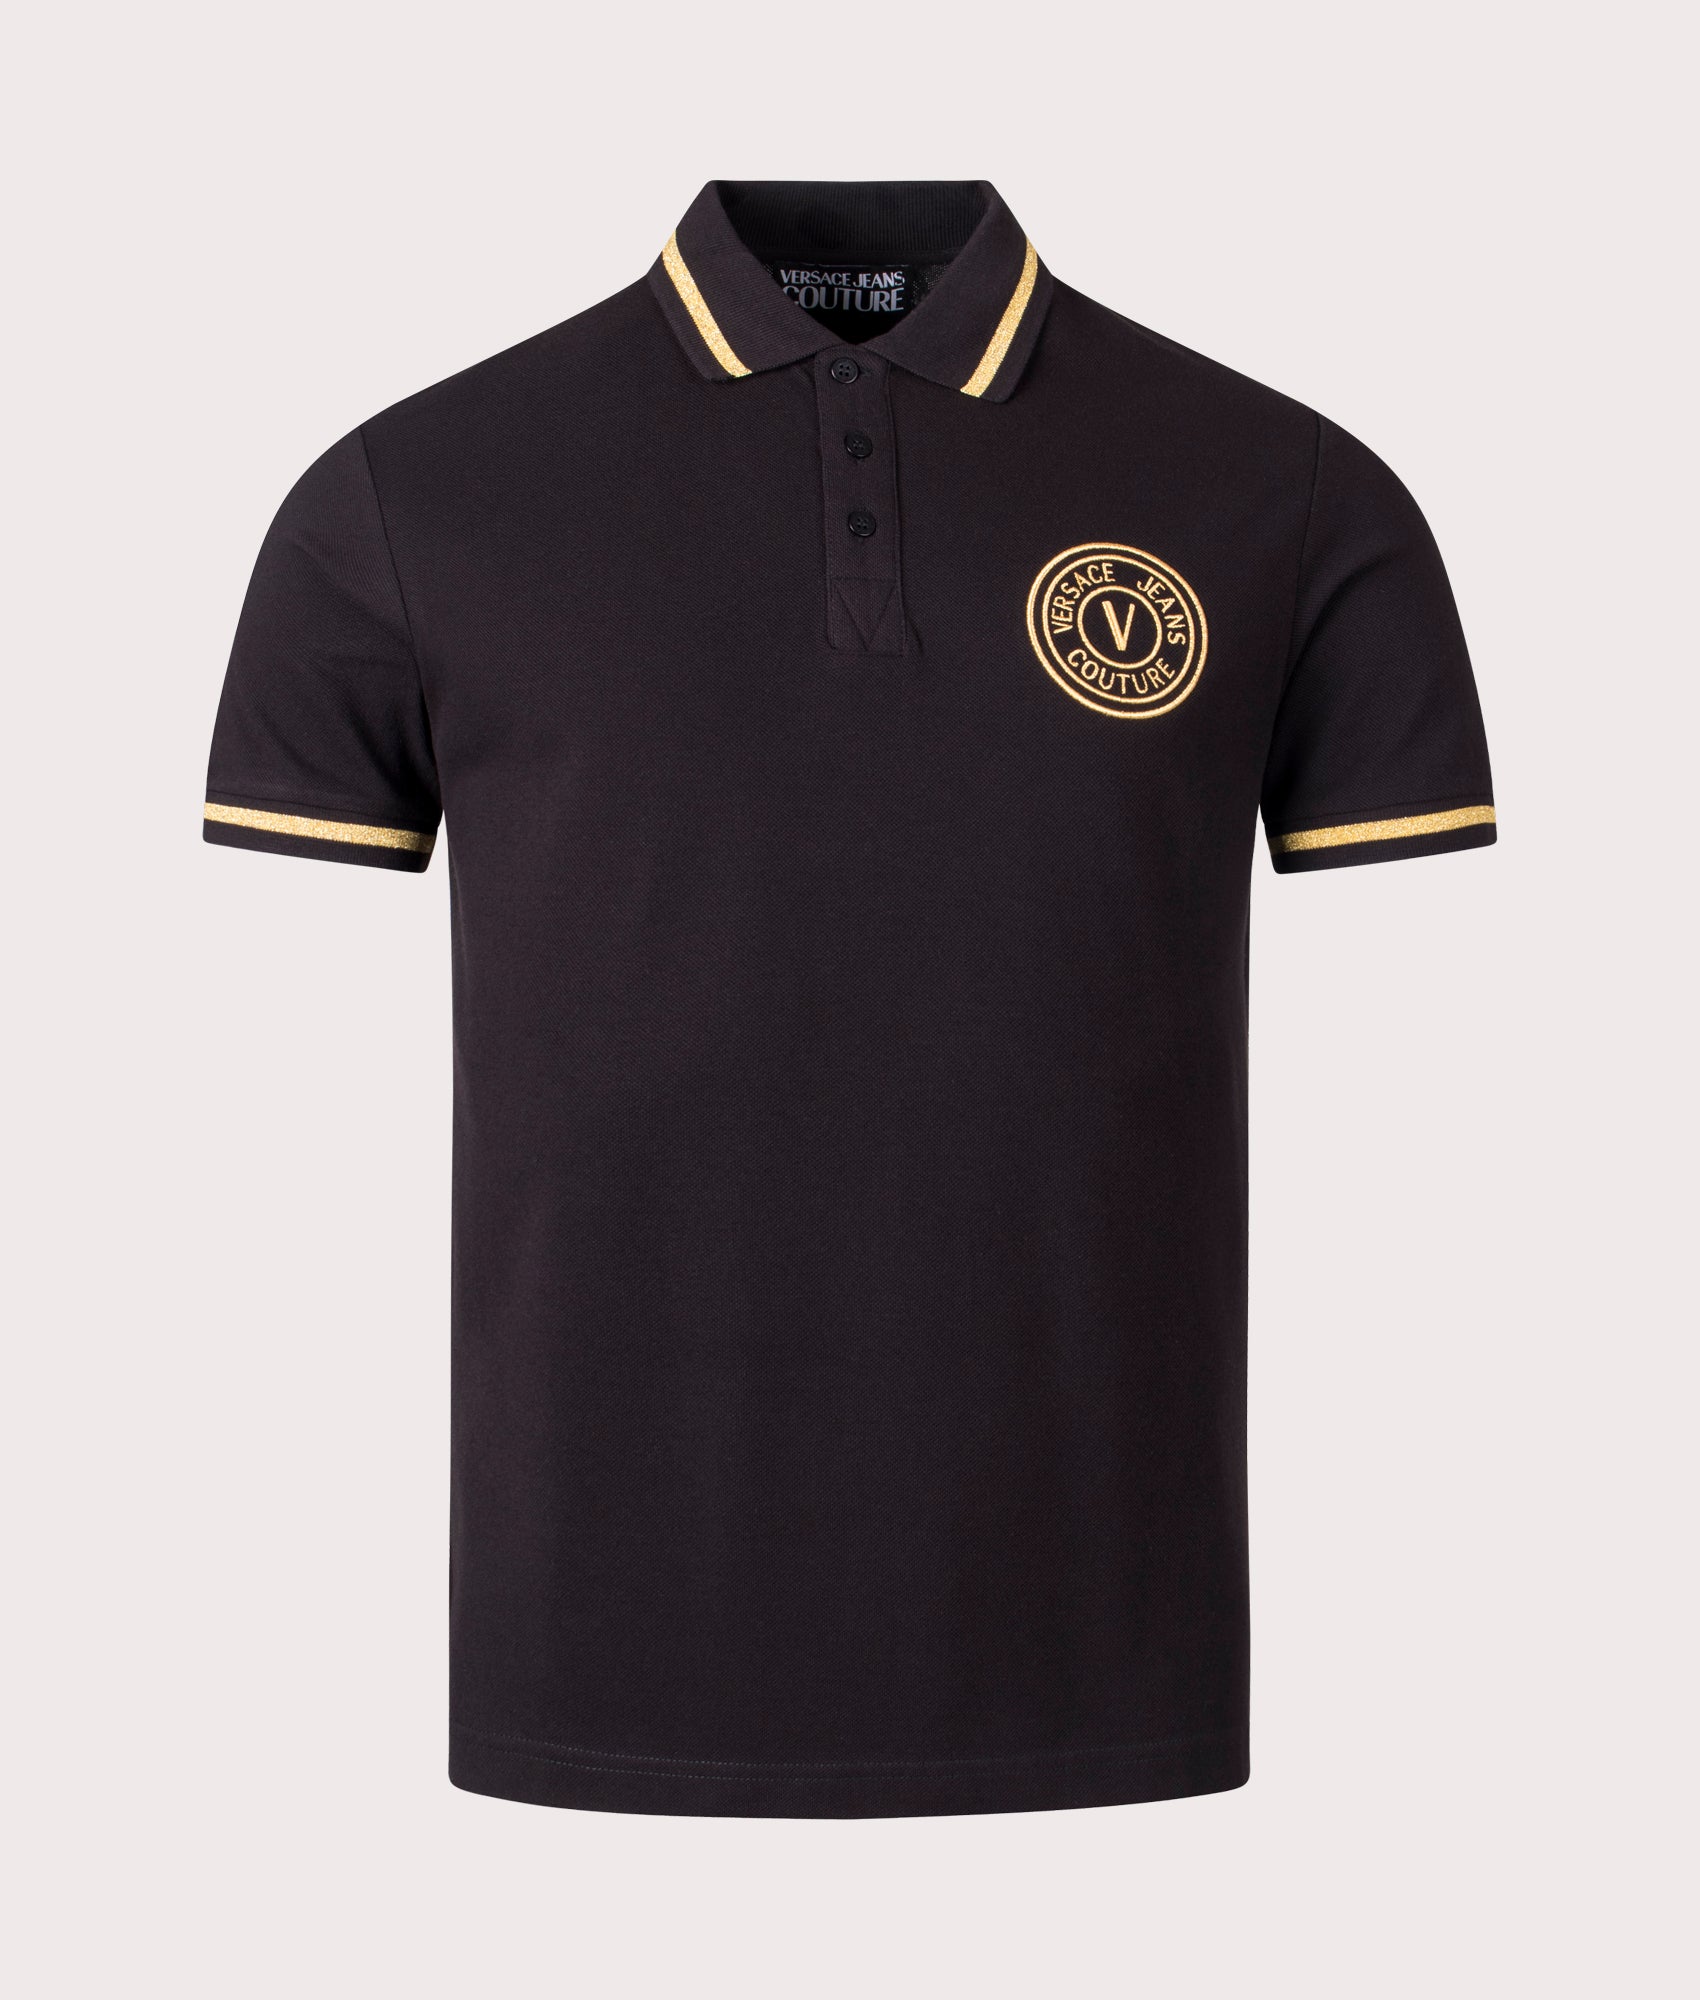 Versace Jeans Couture Mens V Emblem Gold Embroidered Polo Shirt - Colour: G89 Black/Gold - Size: XXL